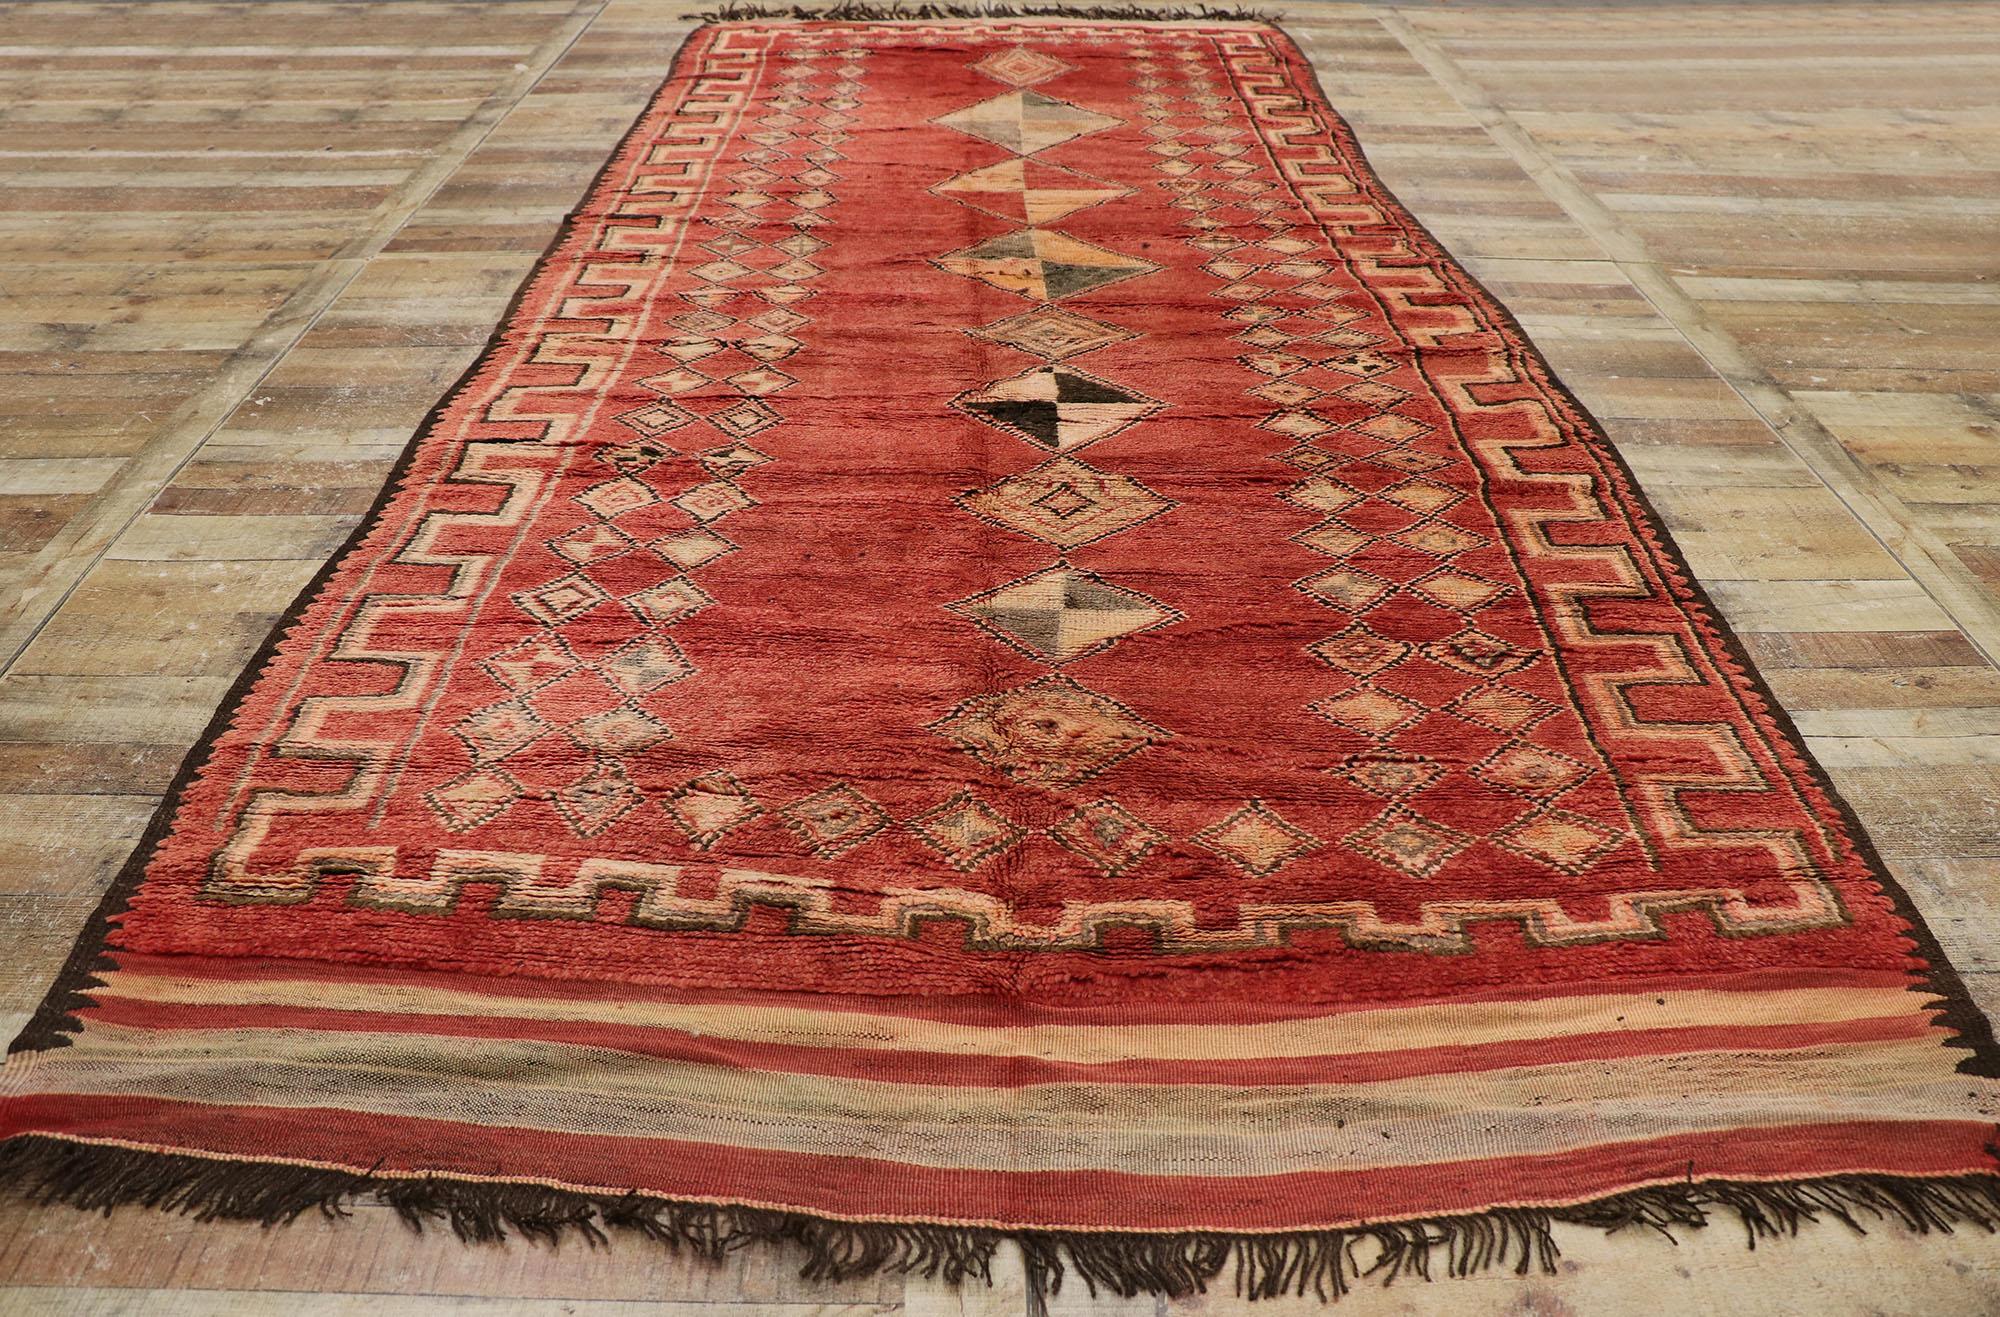 20th Century Vintage Red Taznakht Moroccan Rug by Berber Tribes of Morocco For Sale